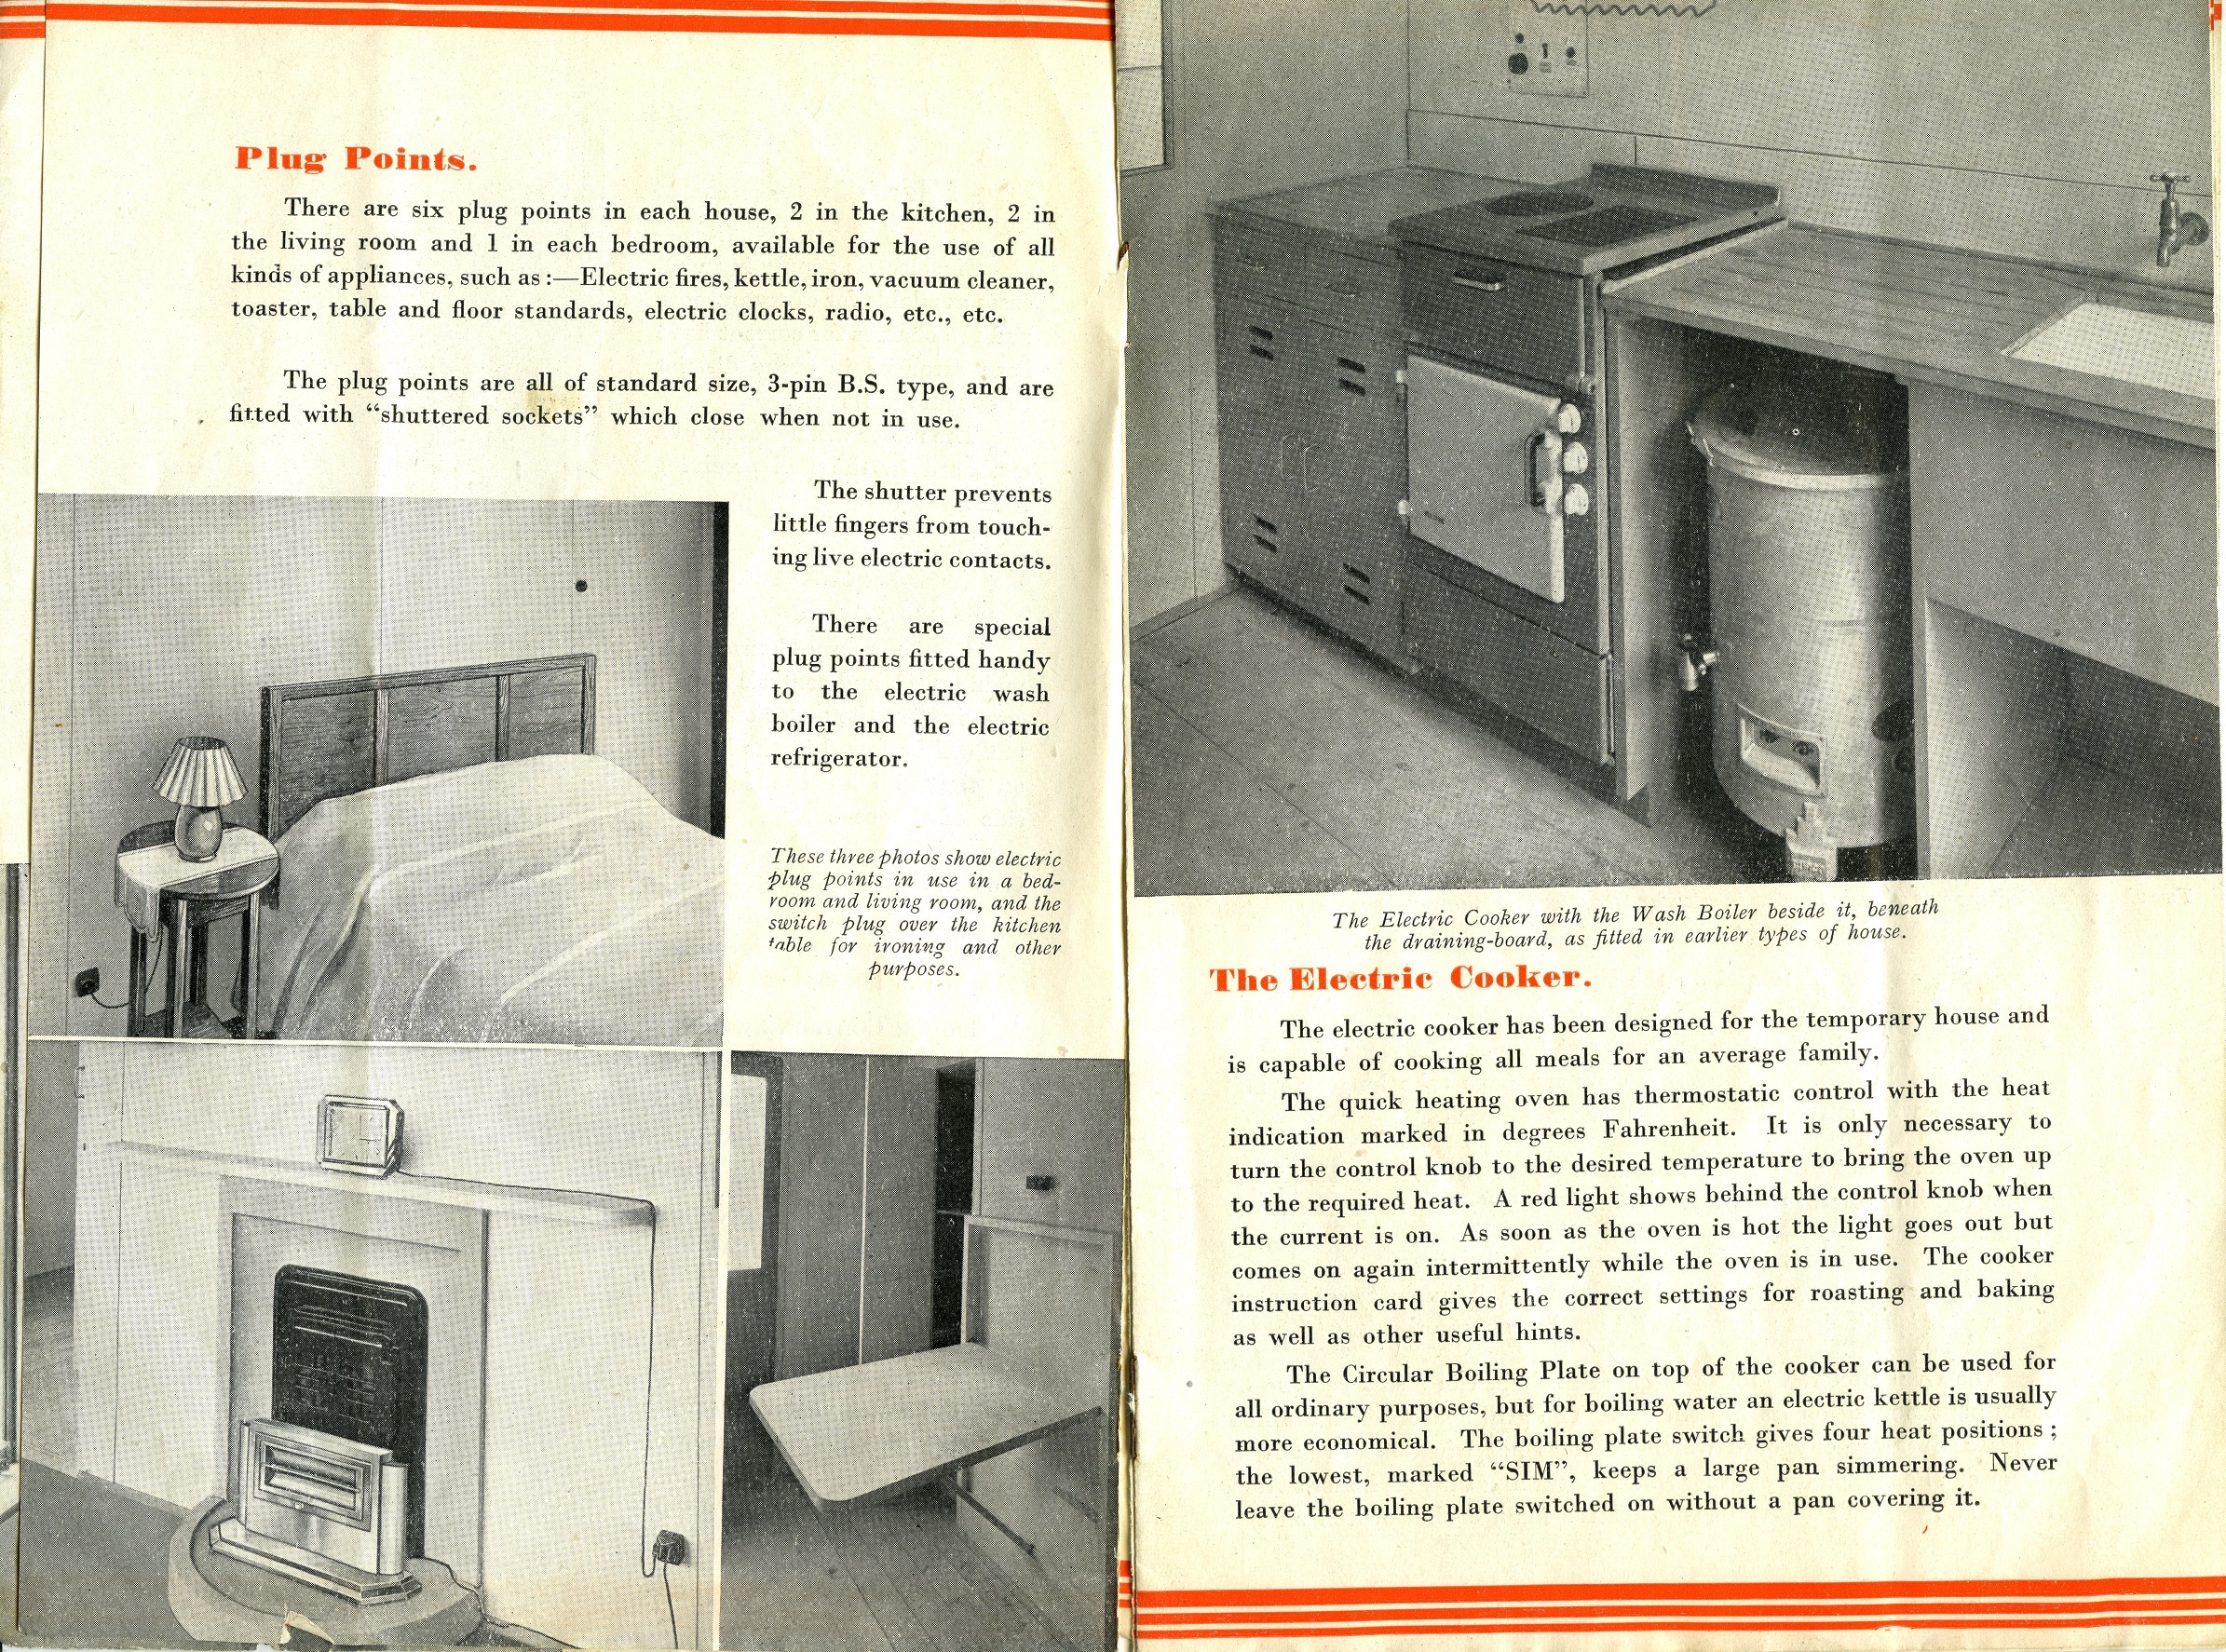 Electric Service in Temporary Houses: Plug Points, The Electric Cooker